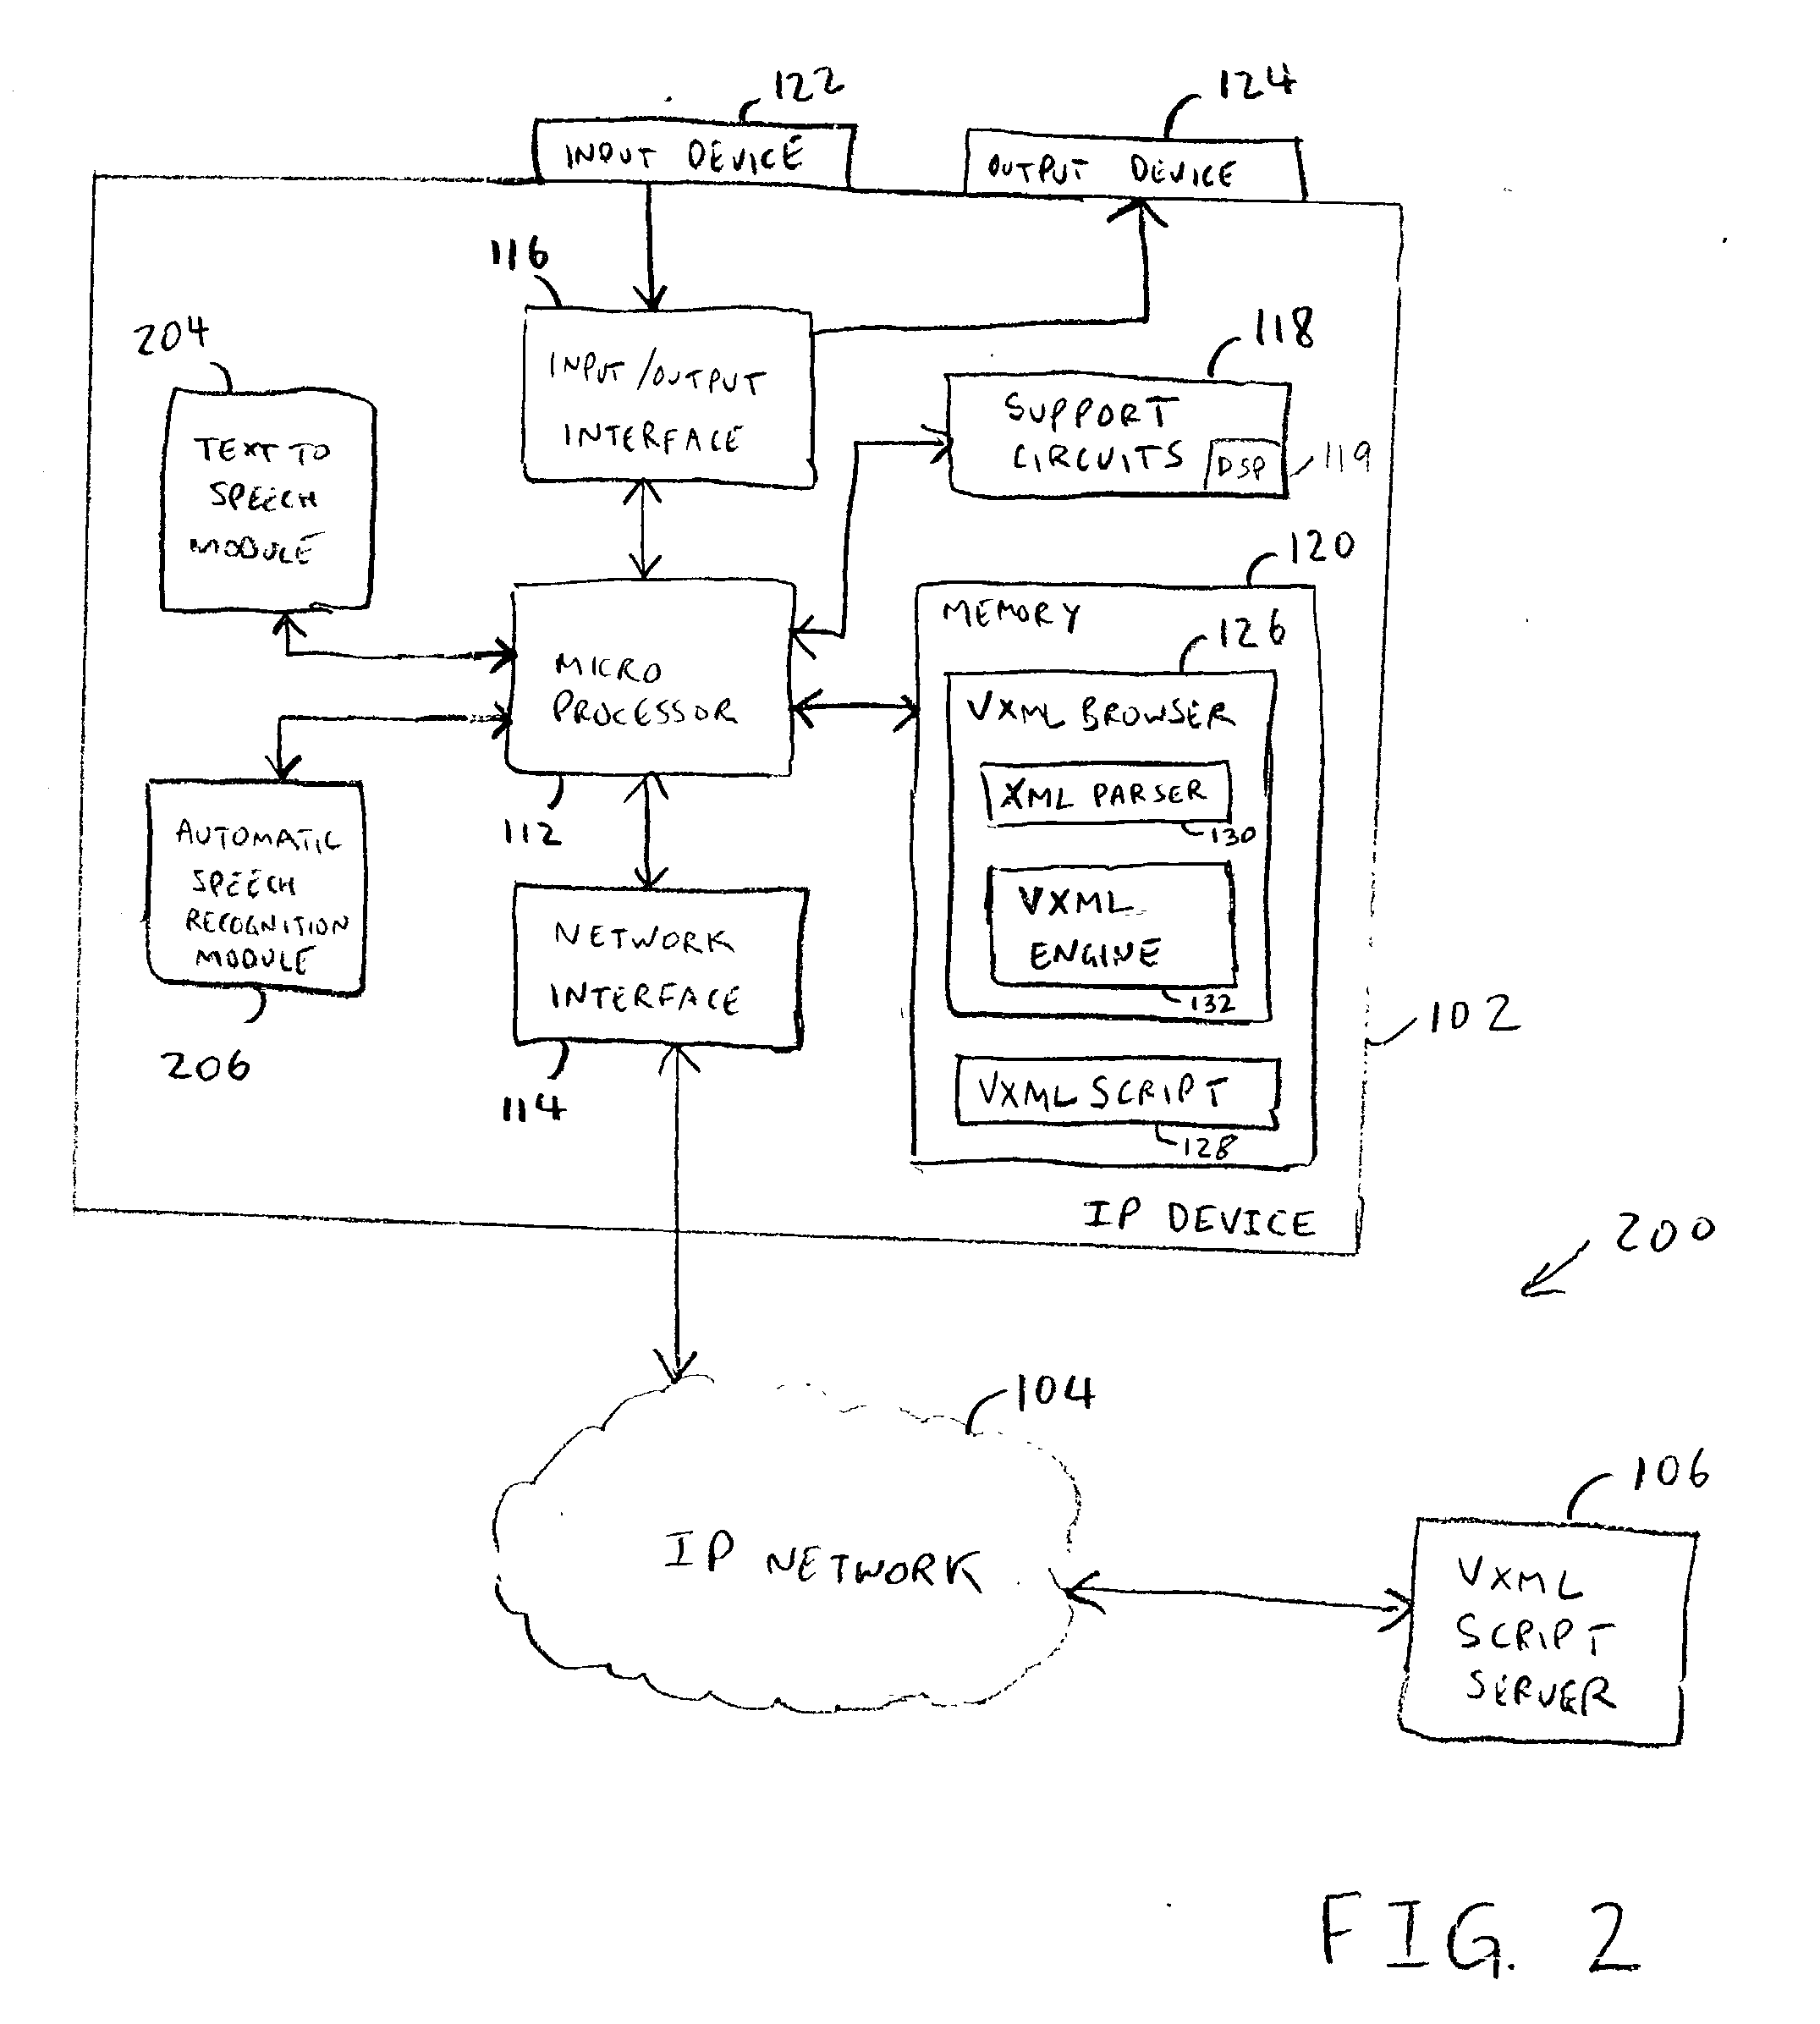 Method of implementing a VXML application into an IP device and an IP device having VXML capability